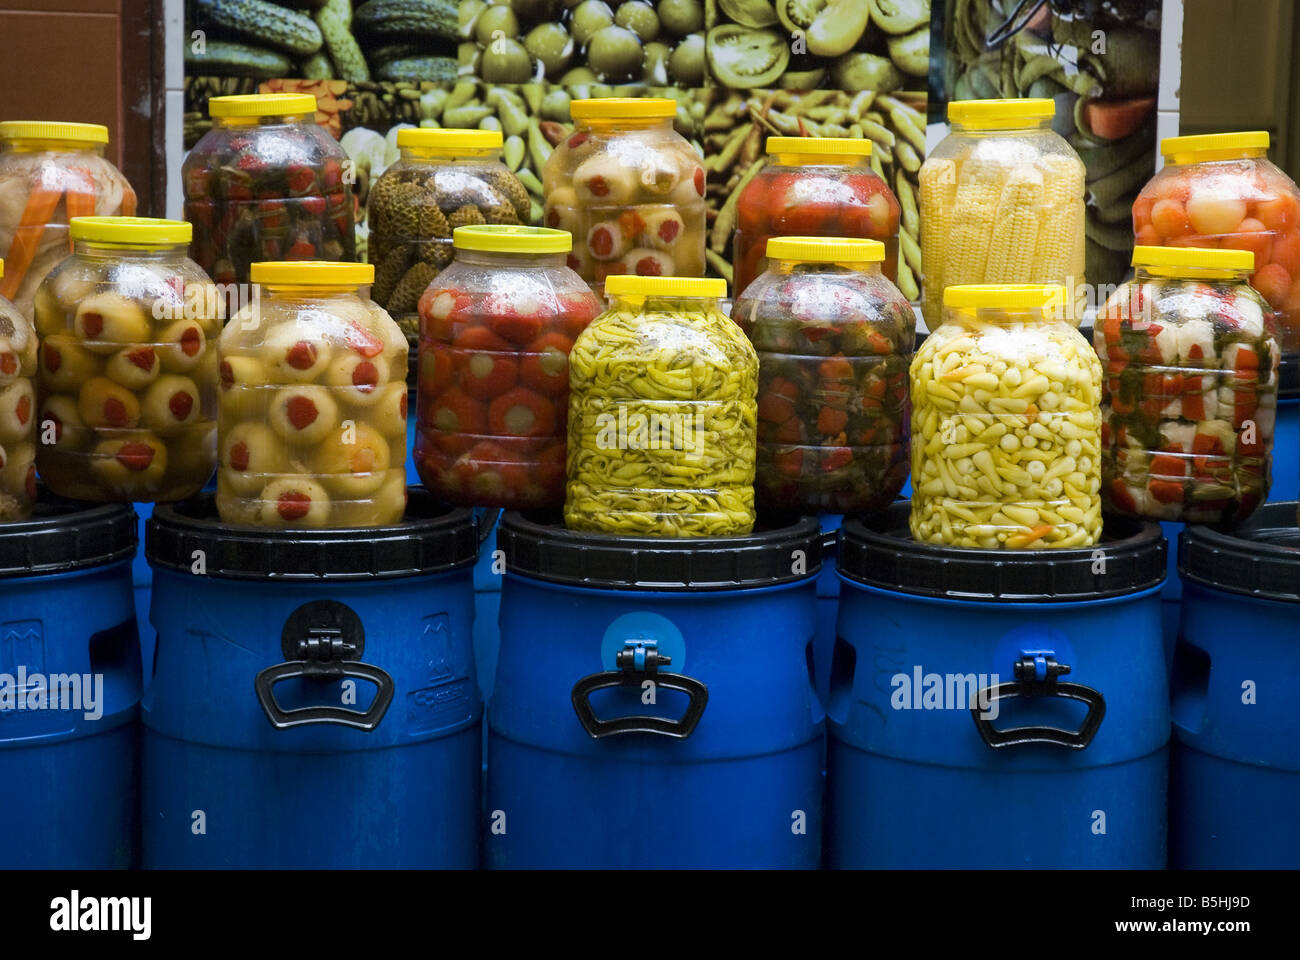 Jars of pickled vegetables for sale on top of blue plastic tubs in the Karakoy bazaar on the Asian side of Istanbul, Turkey. Stock Photo